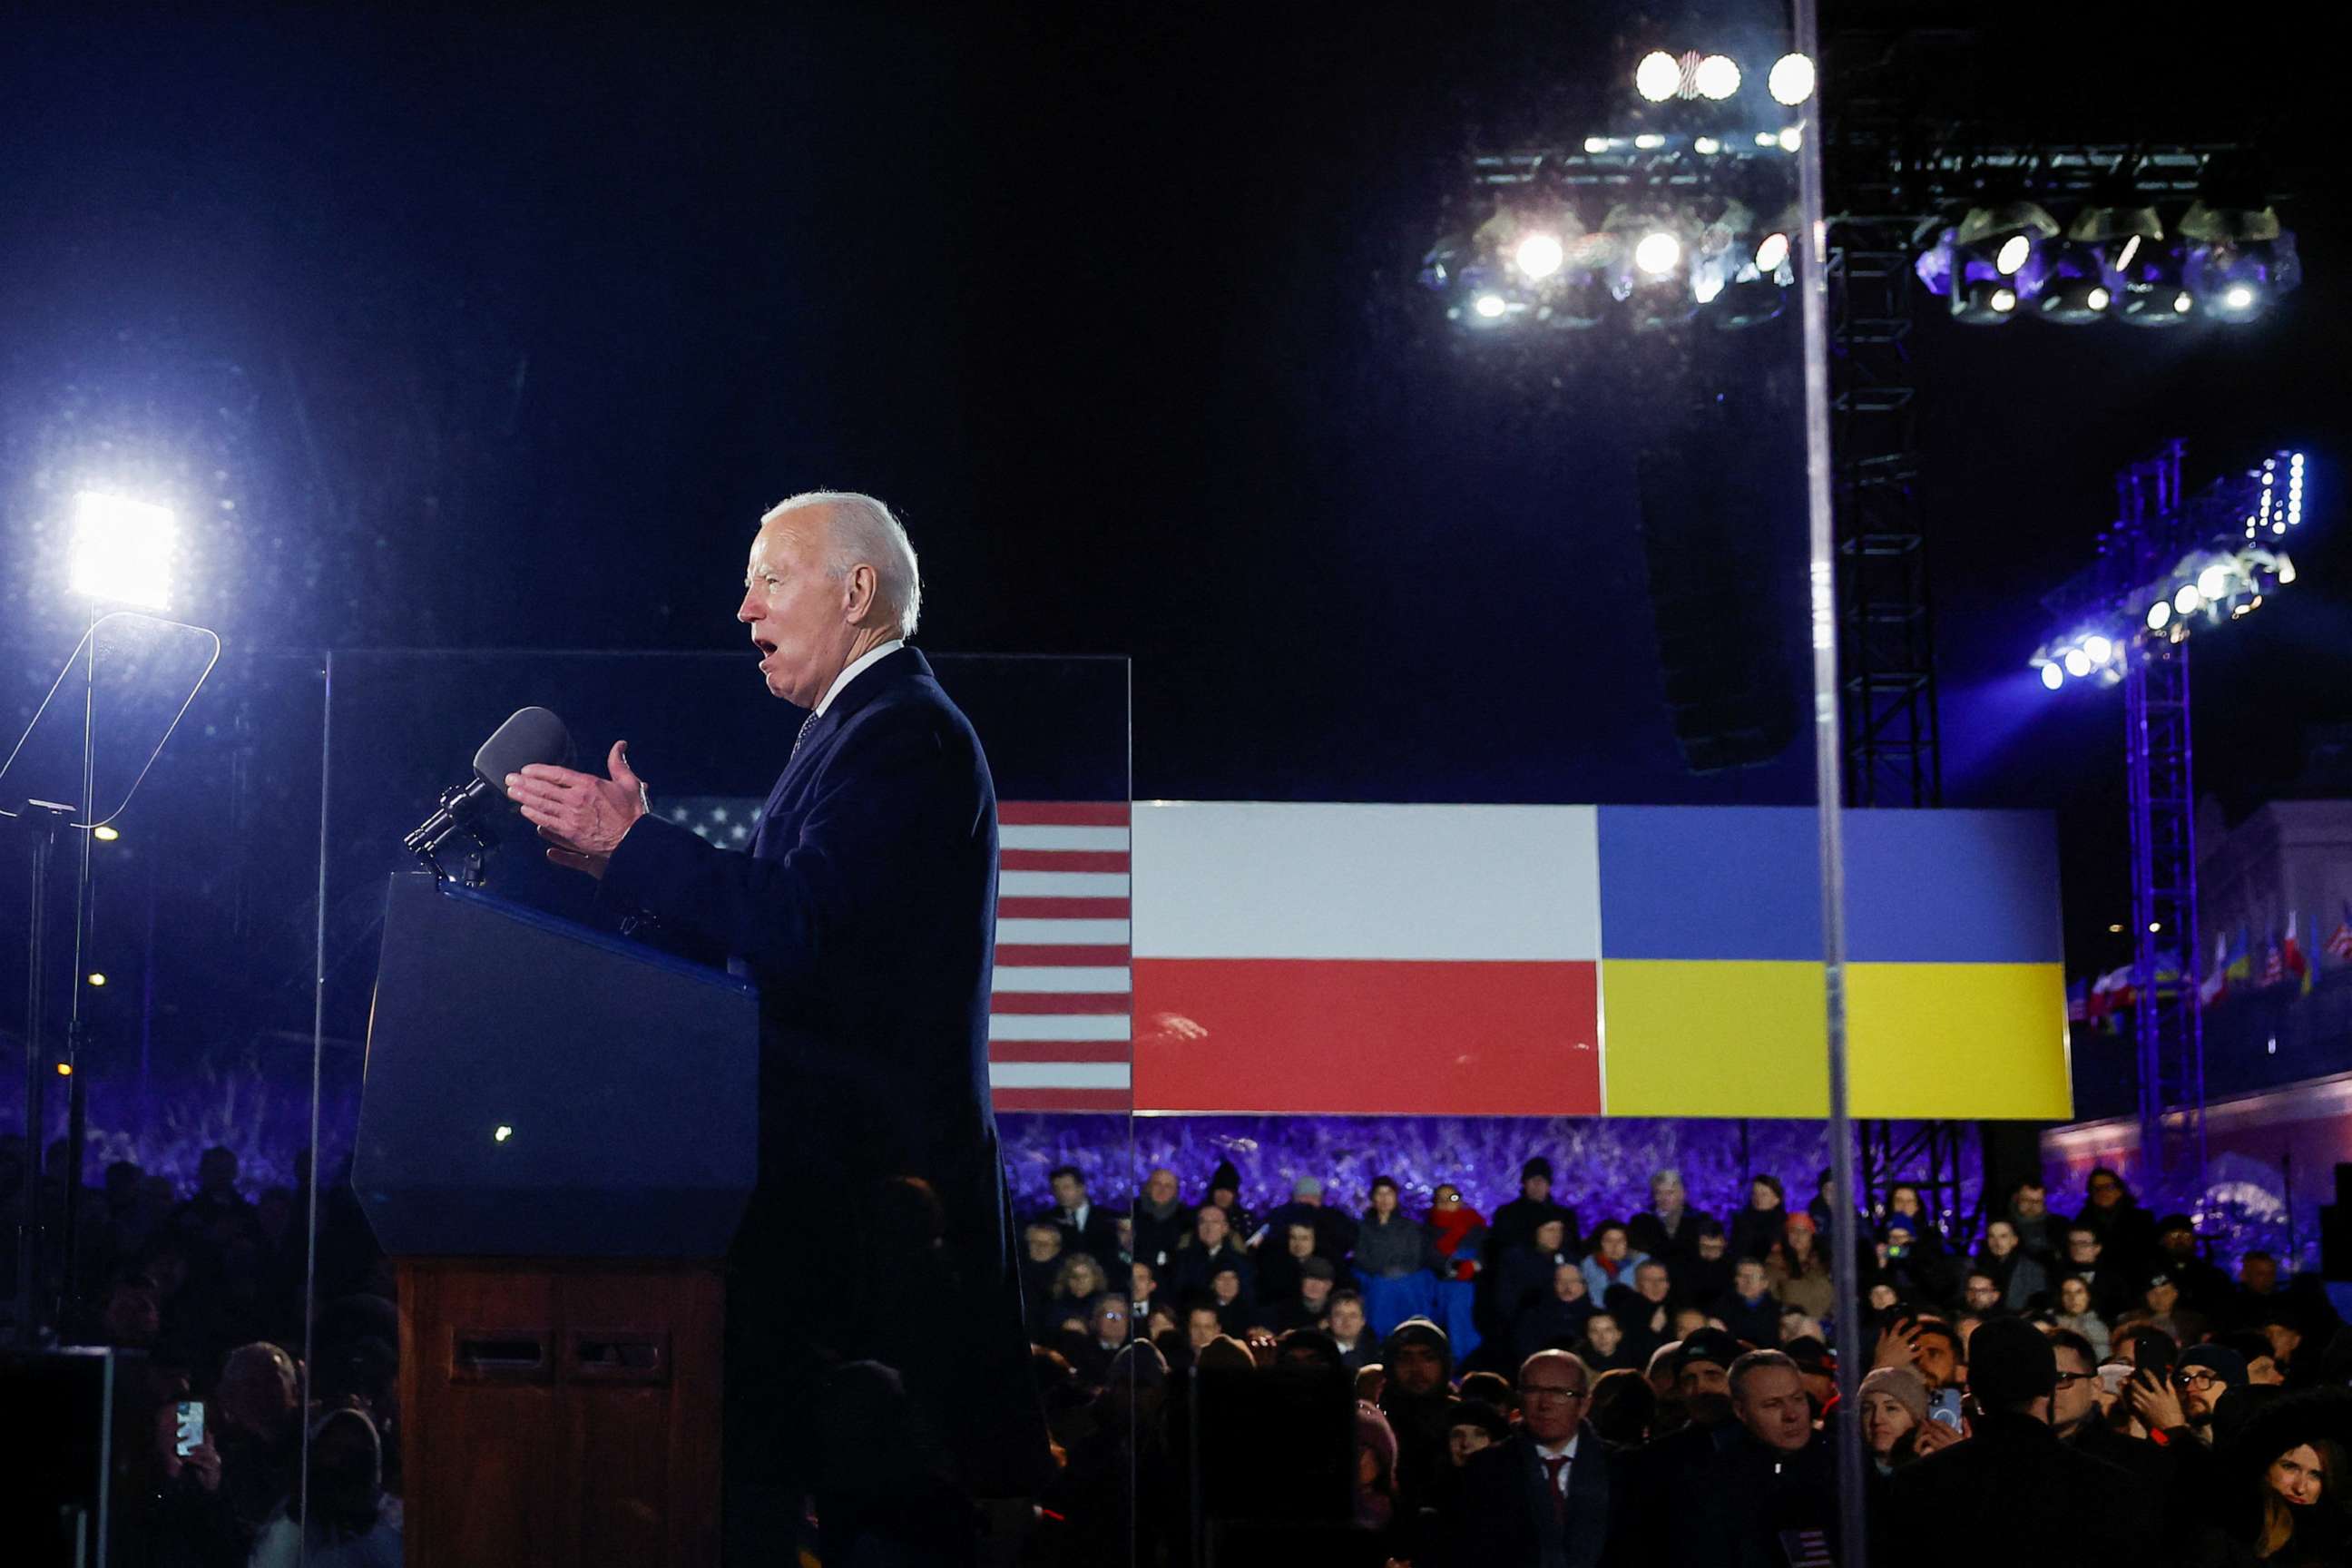 PHOTO: President Joe Biden delivers remarks ahead of the one year anniversary of Russia's invasion of Ukraine, outside the Royal Castle, in Warsaw, Poland, Feb. 21, 2023.